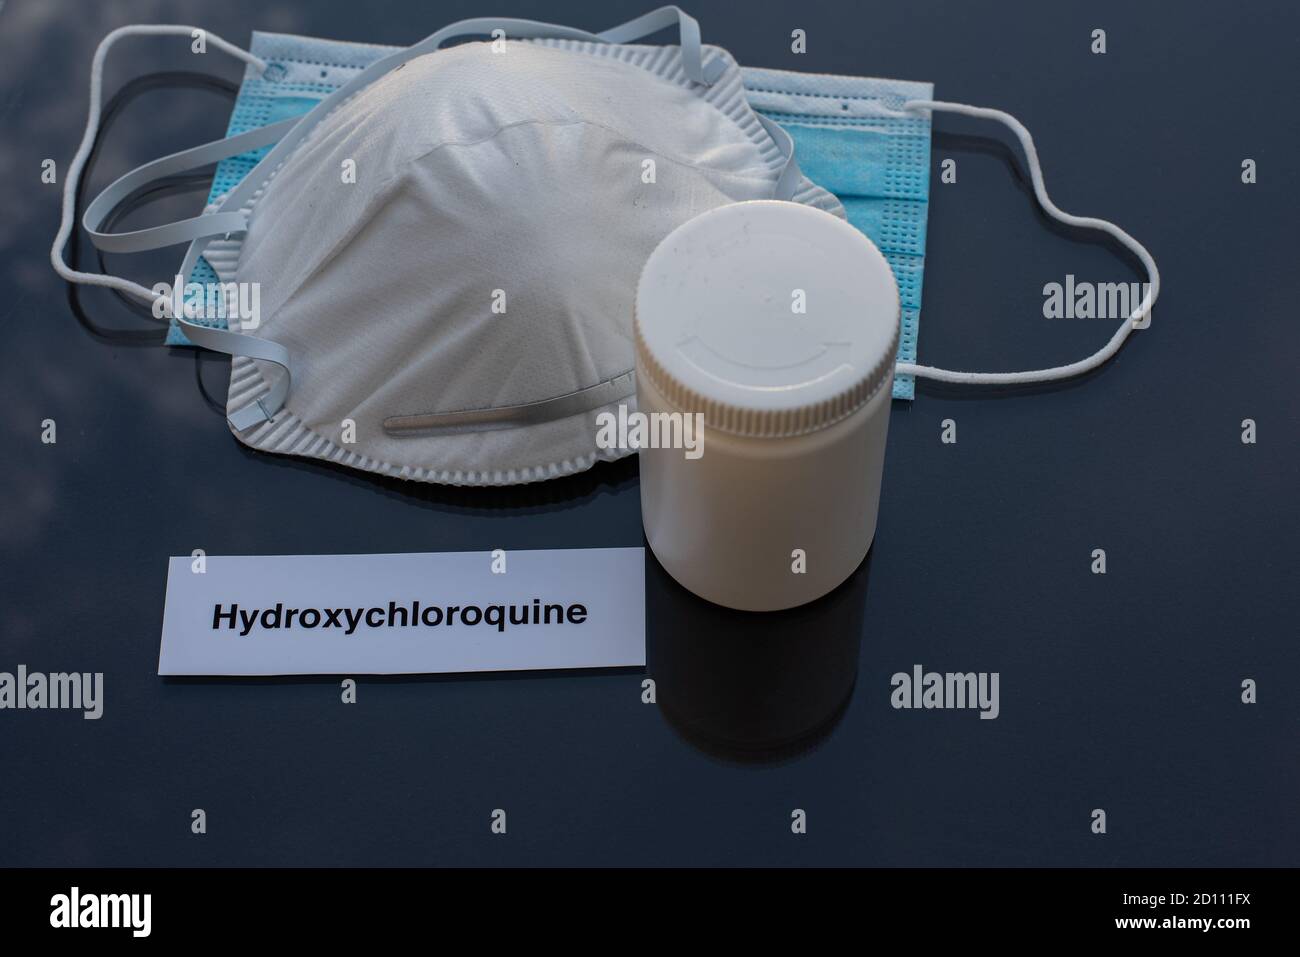 hydroxychloroquine in a gallipot for treatment of covid-19 and two masks as protection on black reflective table top, Denmark, October 4, 2020 Stock Photo